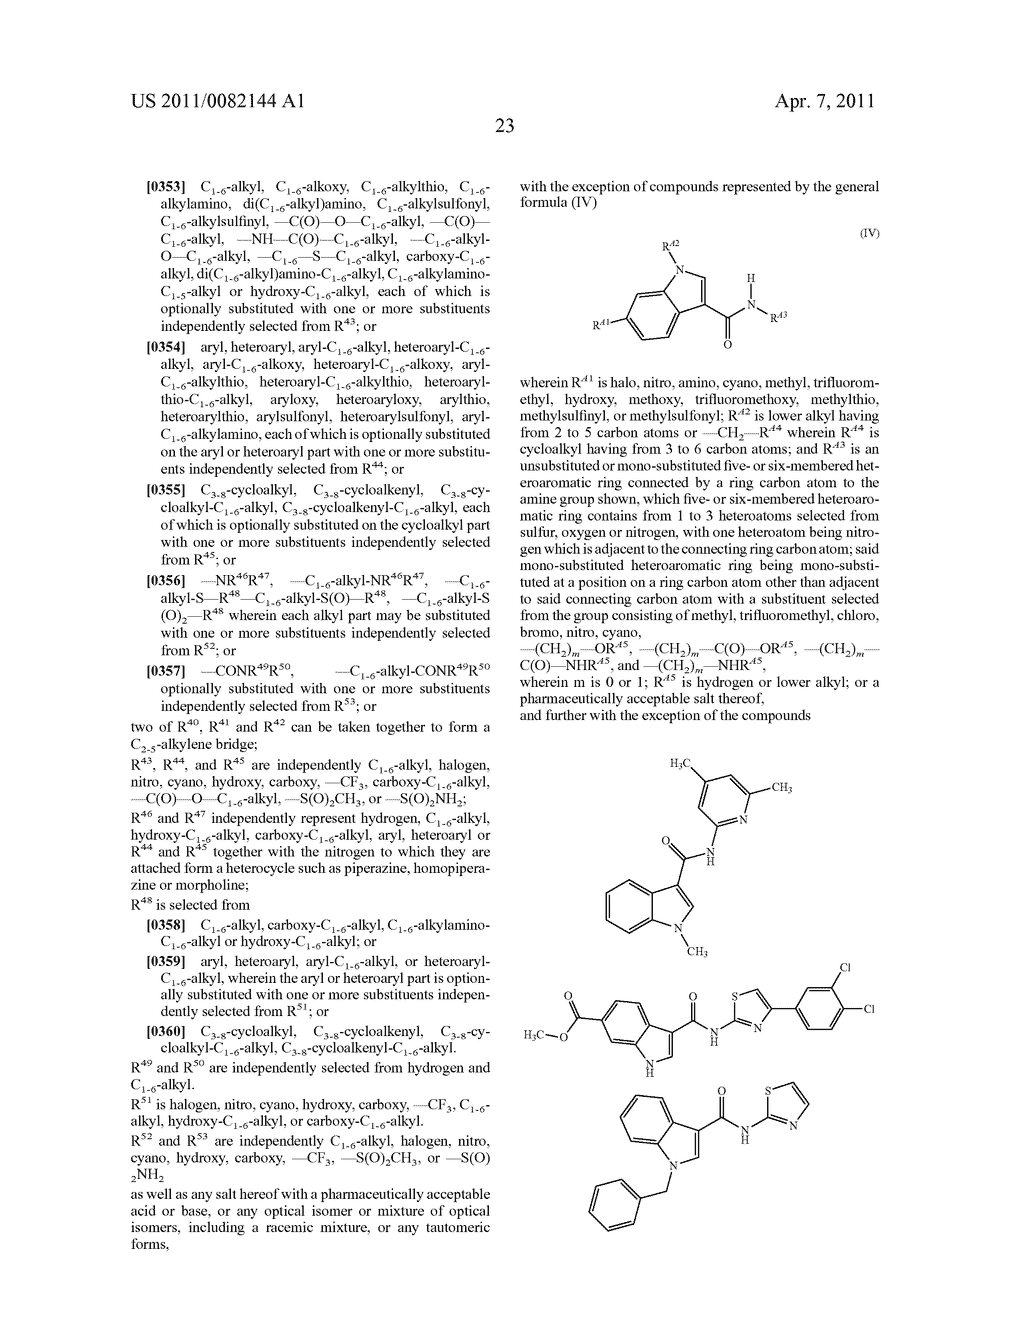 N-HETEROARYL INDOLE CARBOXAMIDES AND ANALOGUES THEREOF, FOR USE AS GLUCOKINASE ACTIVATORS IN THE TREATMENT OF DIABETES - diagram, schematic, and image 24